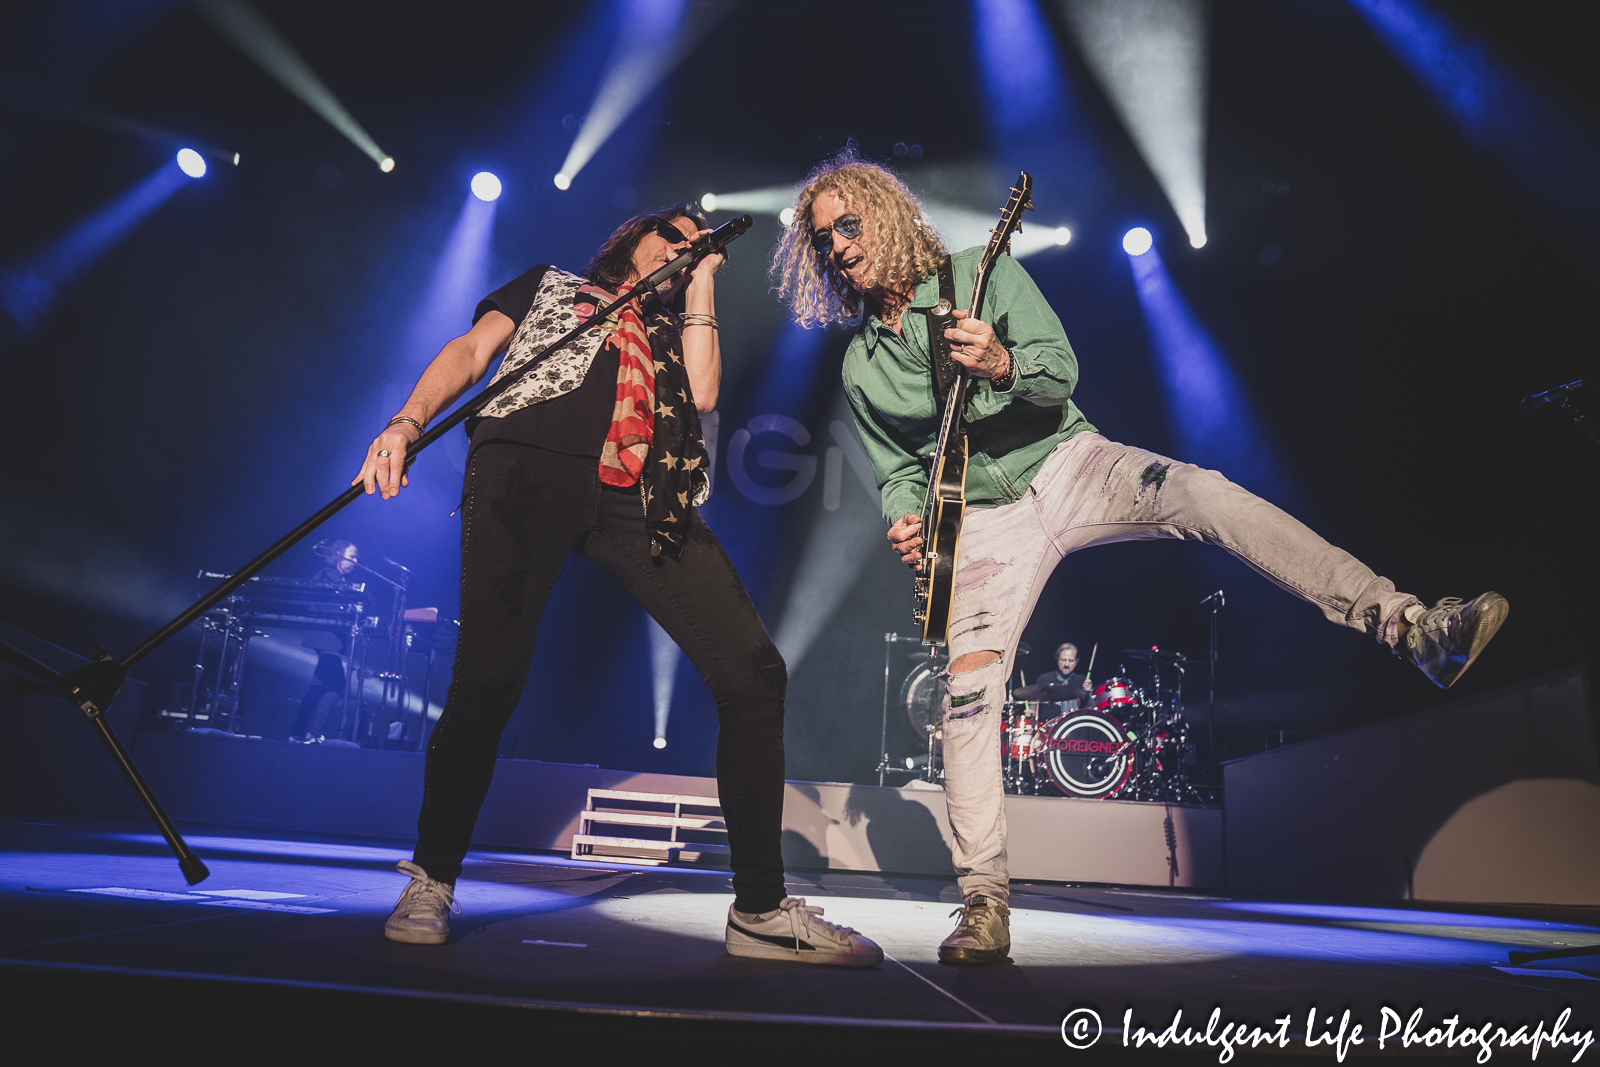 Foreigner lead singer Kelly Hansen and guitarist Bruce Watson performing together at Hartman Arena in Park City, KS on April 30, 2023.